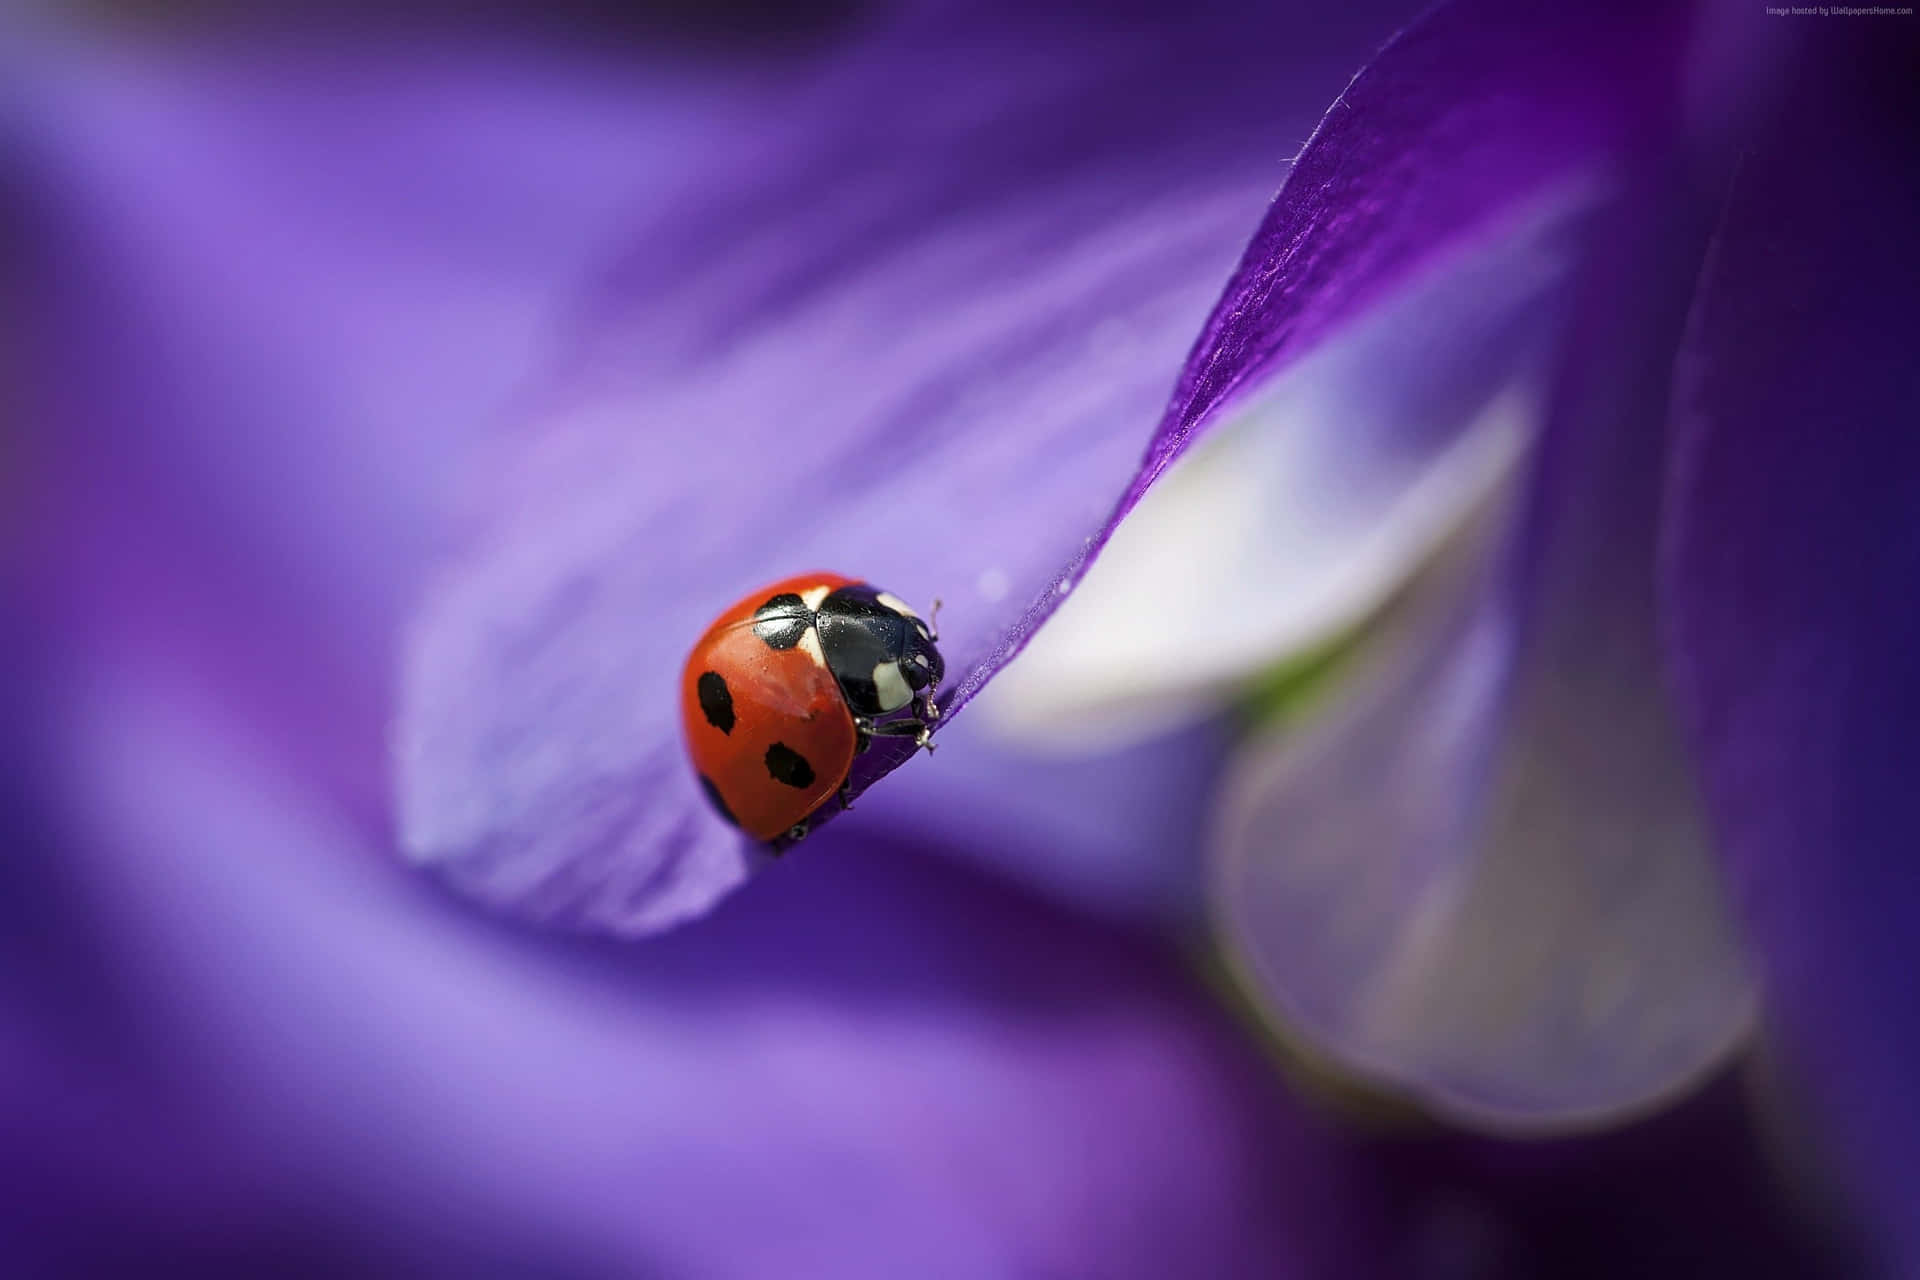 A colorful ladybug on an iPhone Wallpaper